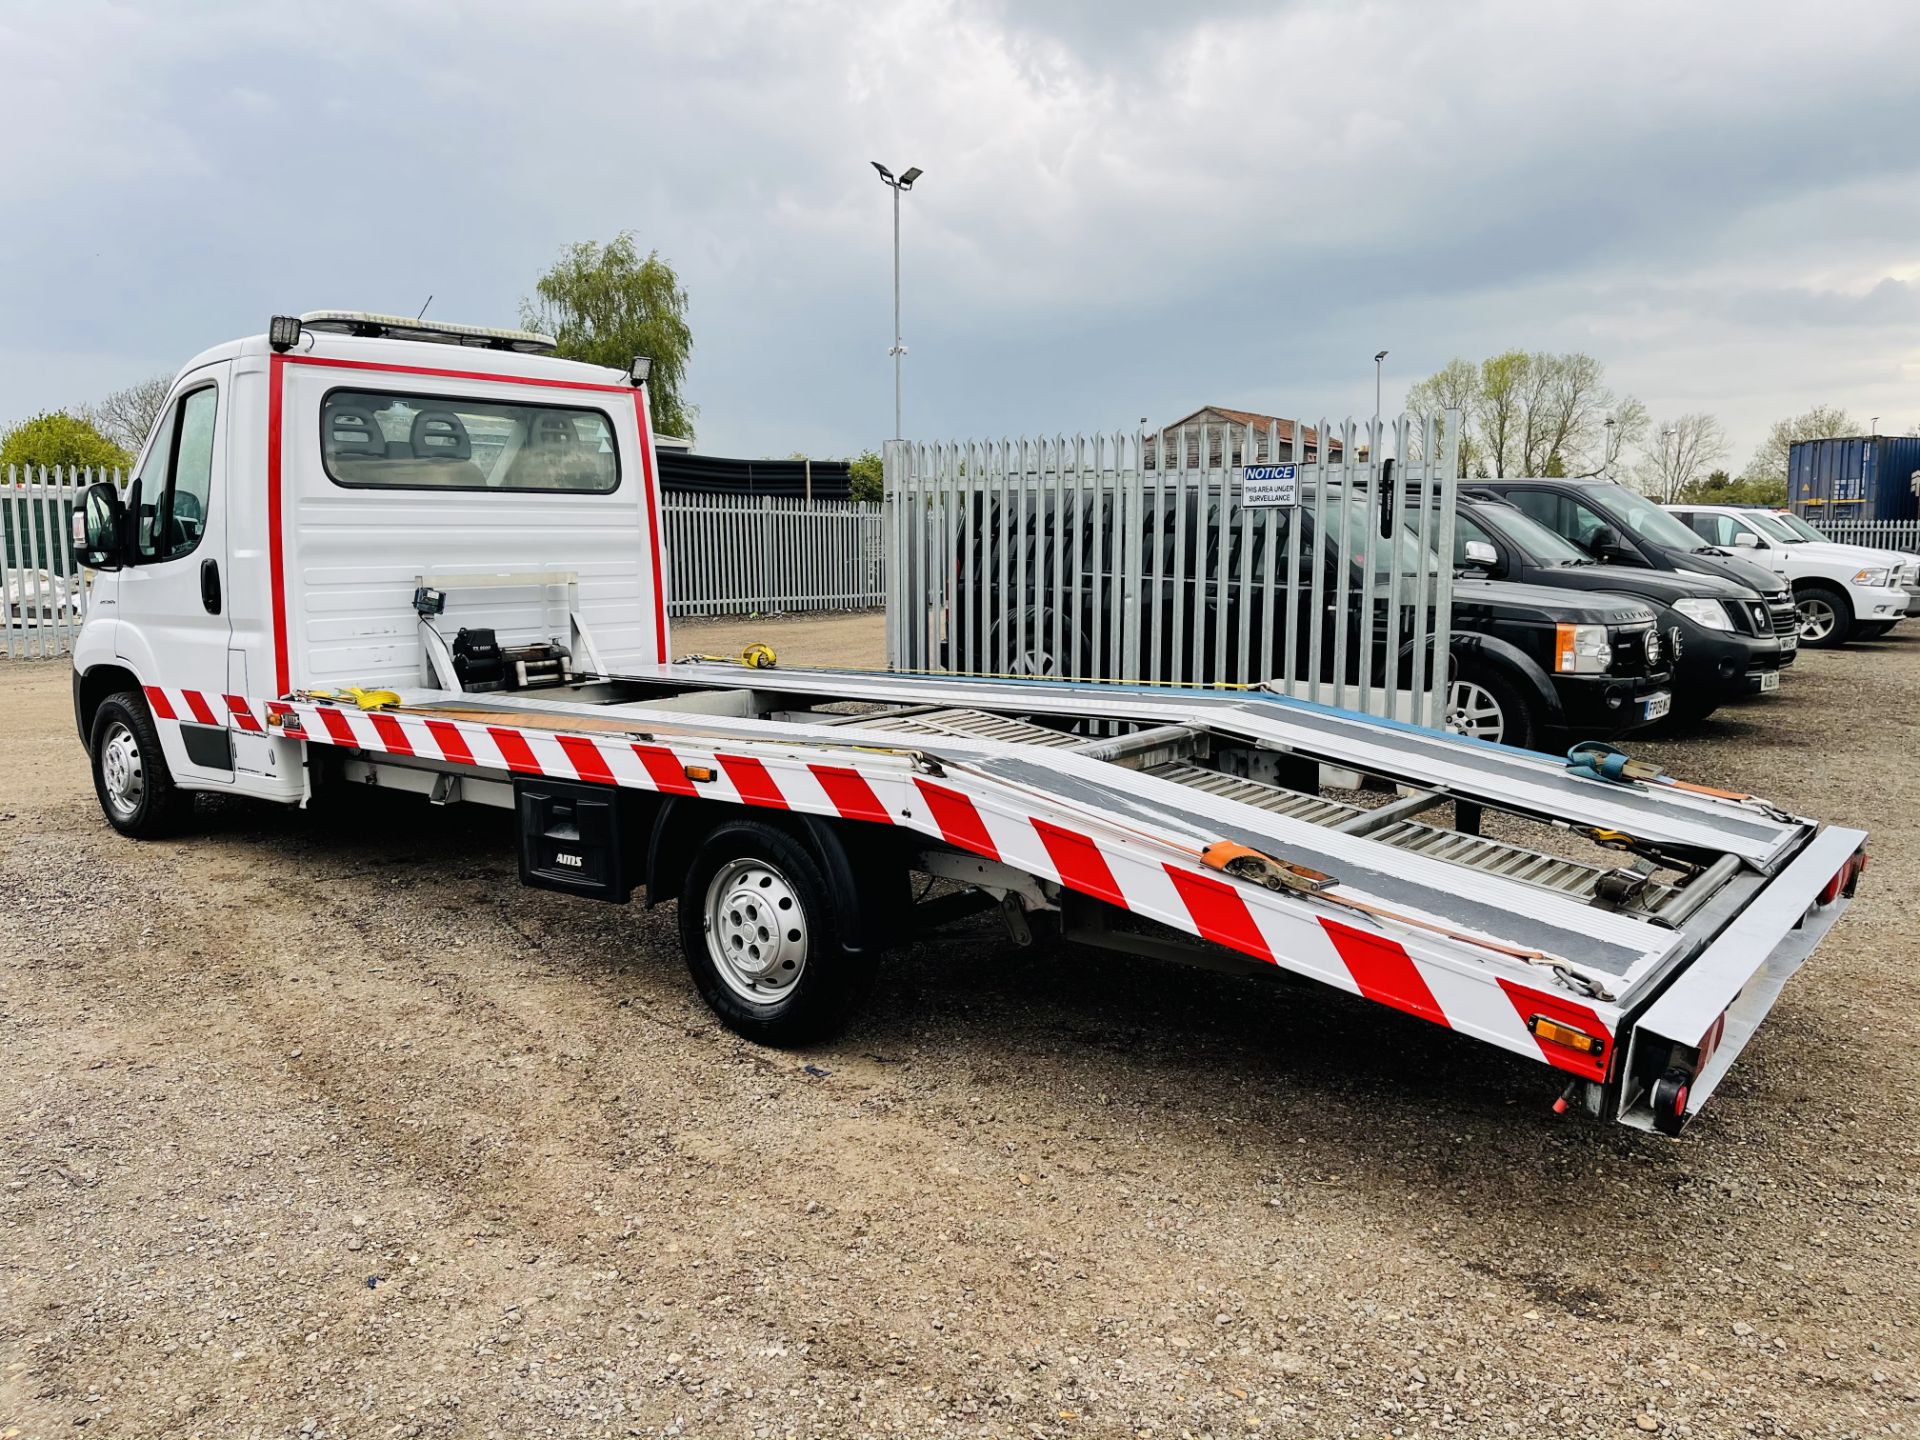 ** ON SALE ** Fiat Ducato 2.3 Multi-jet L3 2017 '17 Reg' Recovery Beaver-Tail -Air con- Alloy body - Image 7 of 17